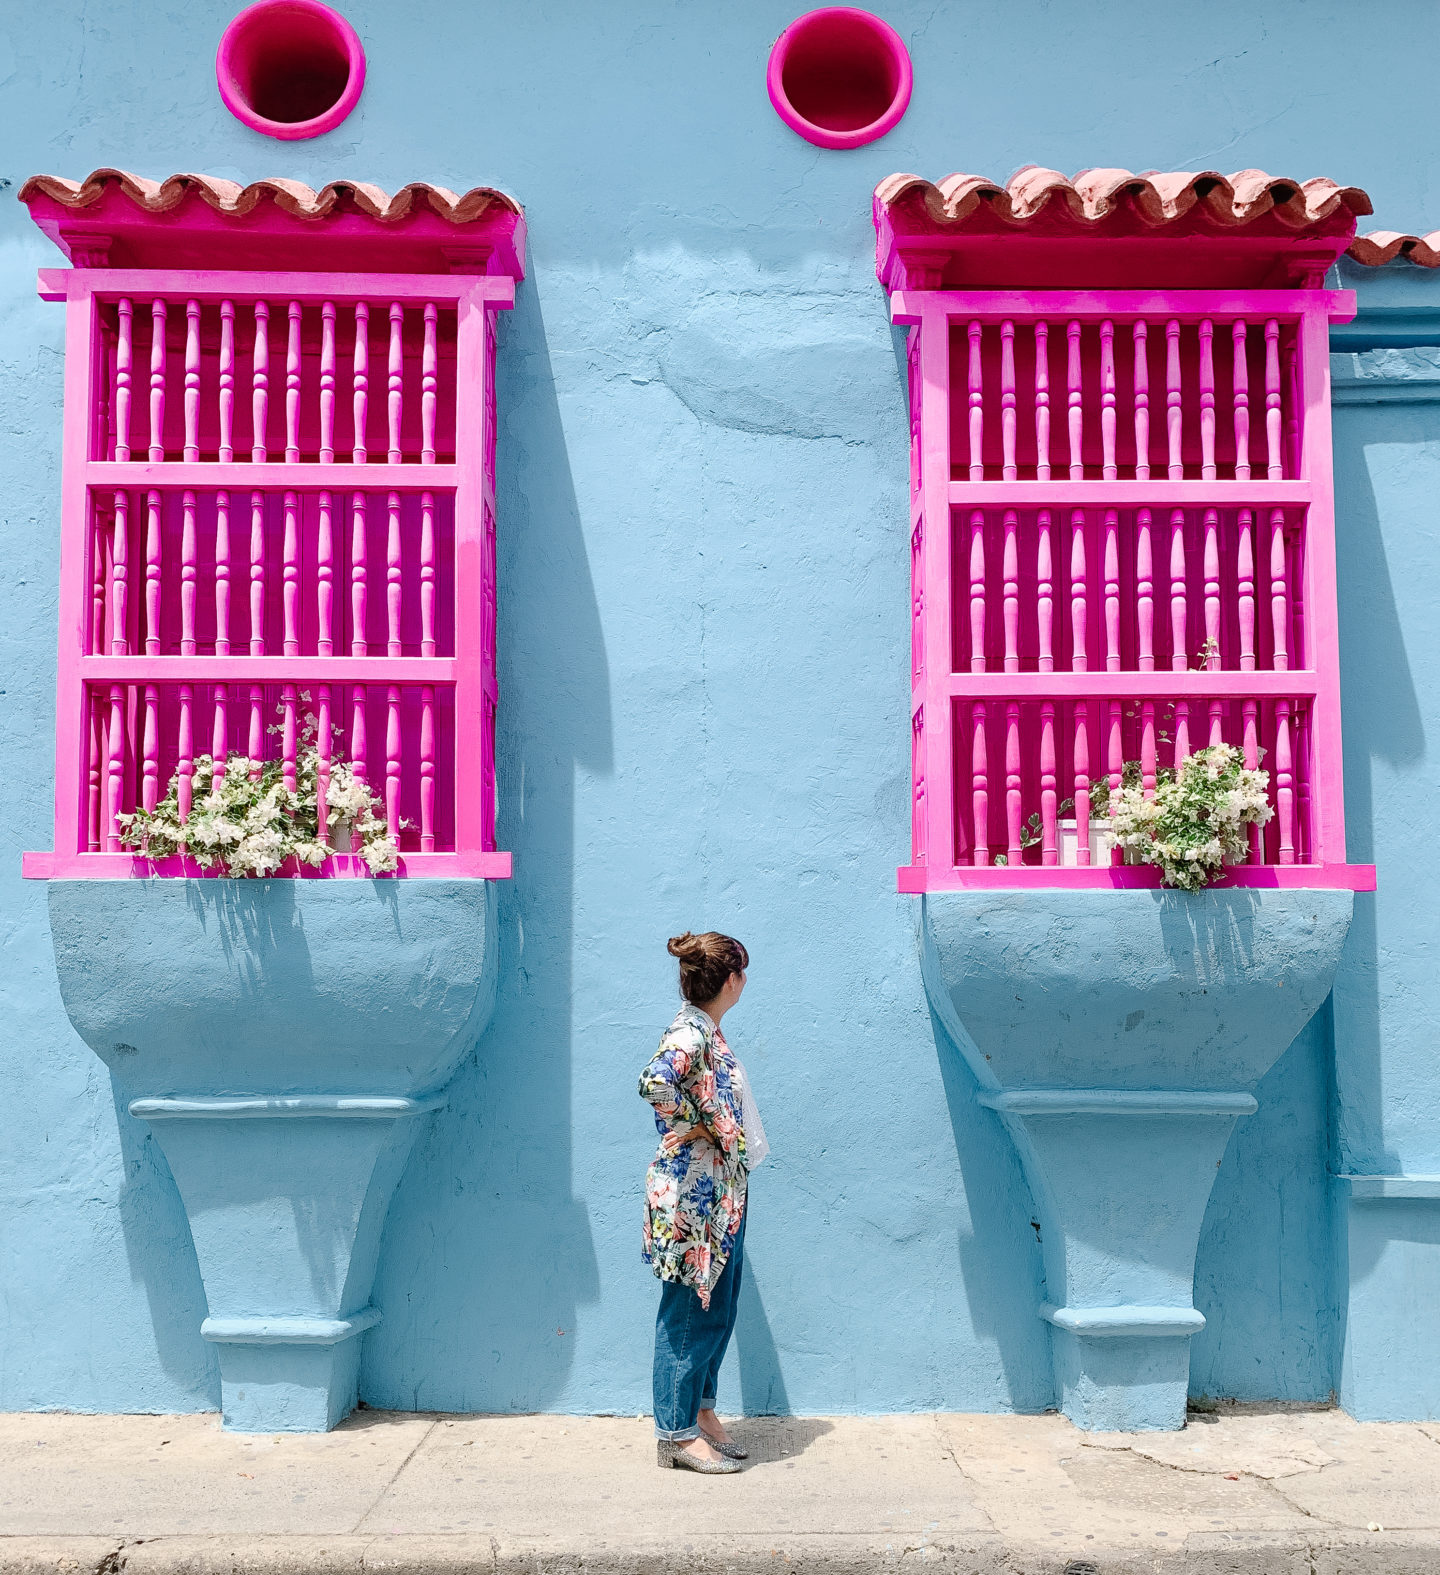 Colourful places in Cartagena